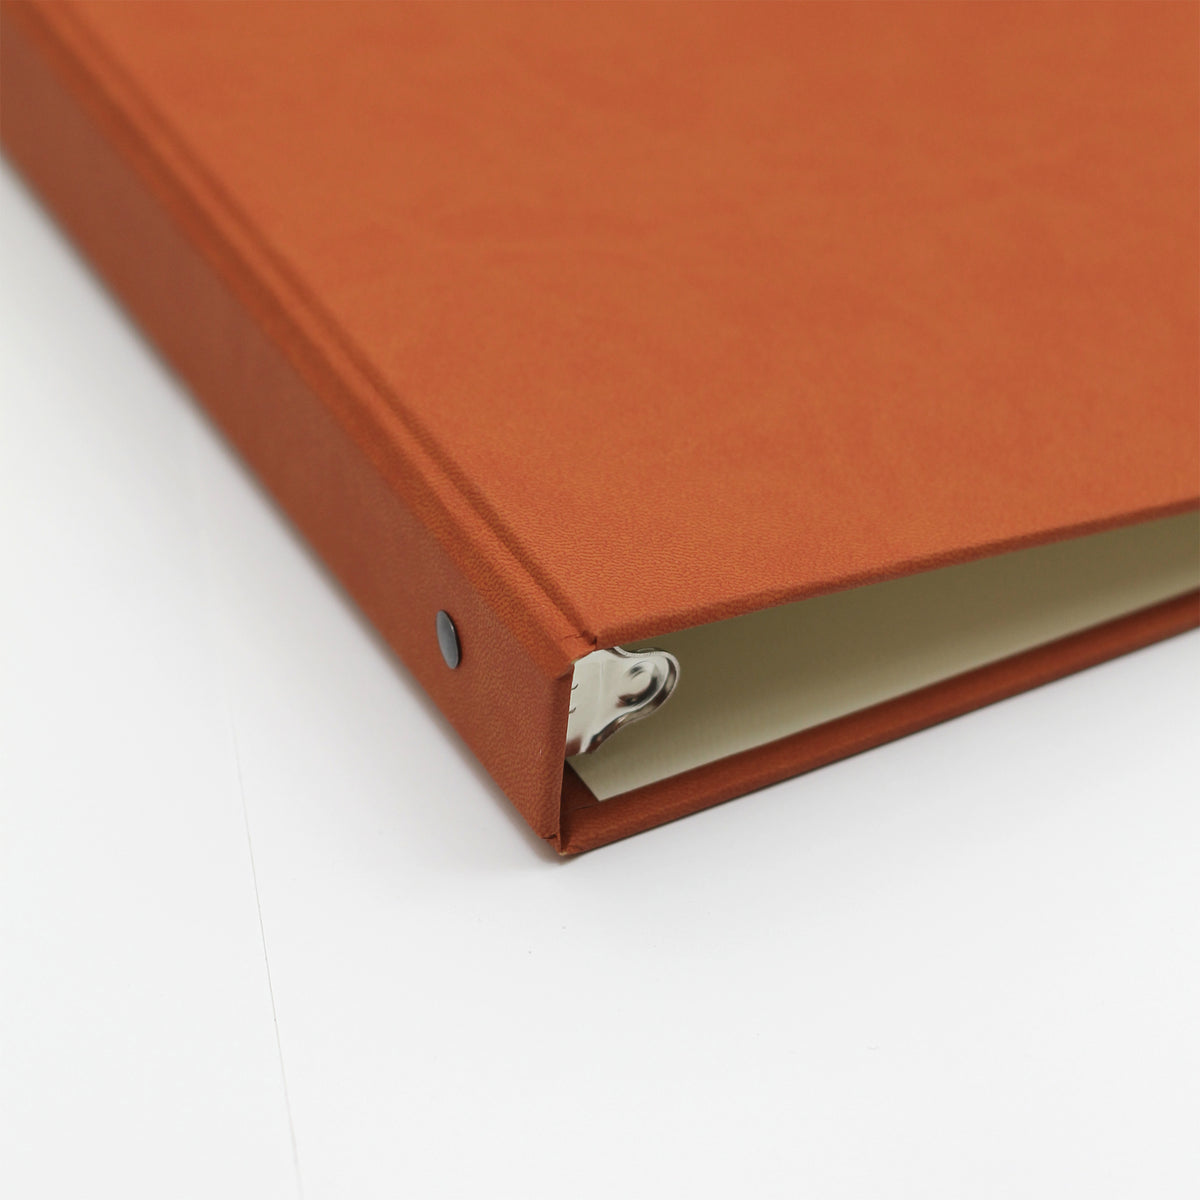 Storage Binder for Photos or Documents with Terra Cotta Vegan Leather Cover